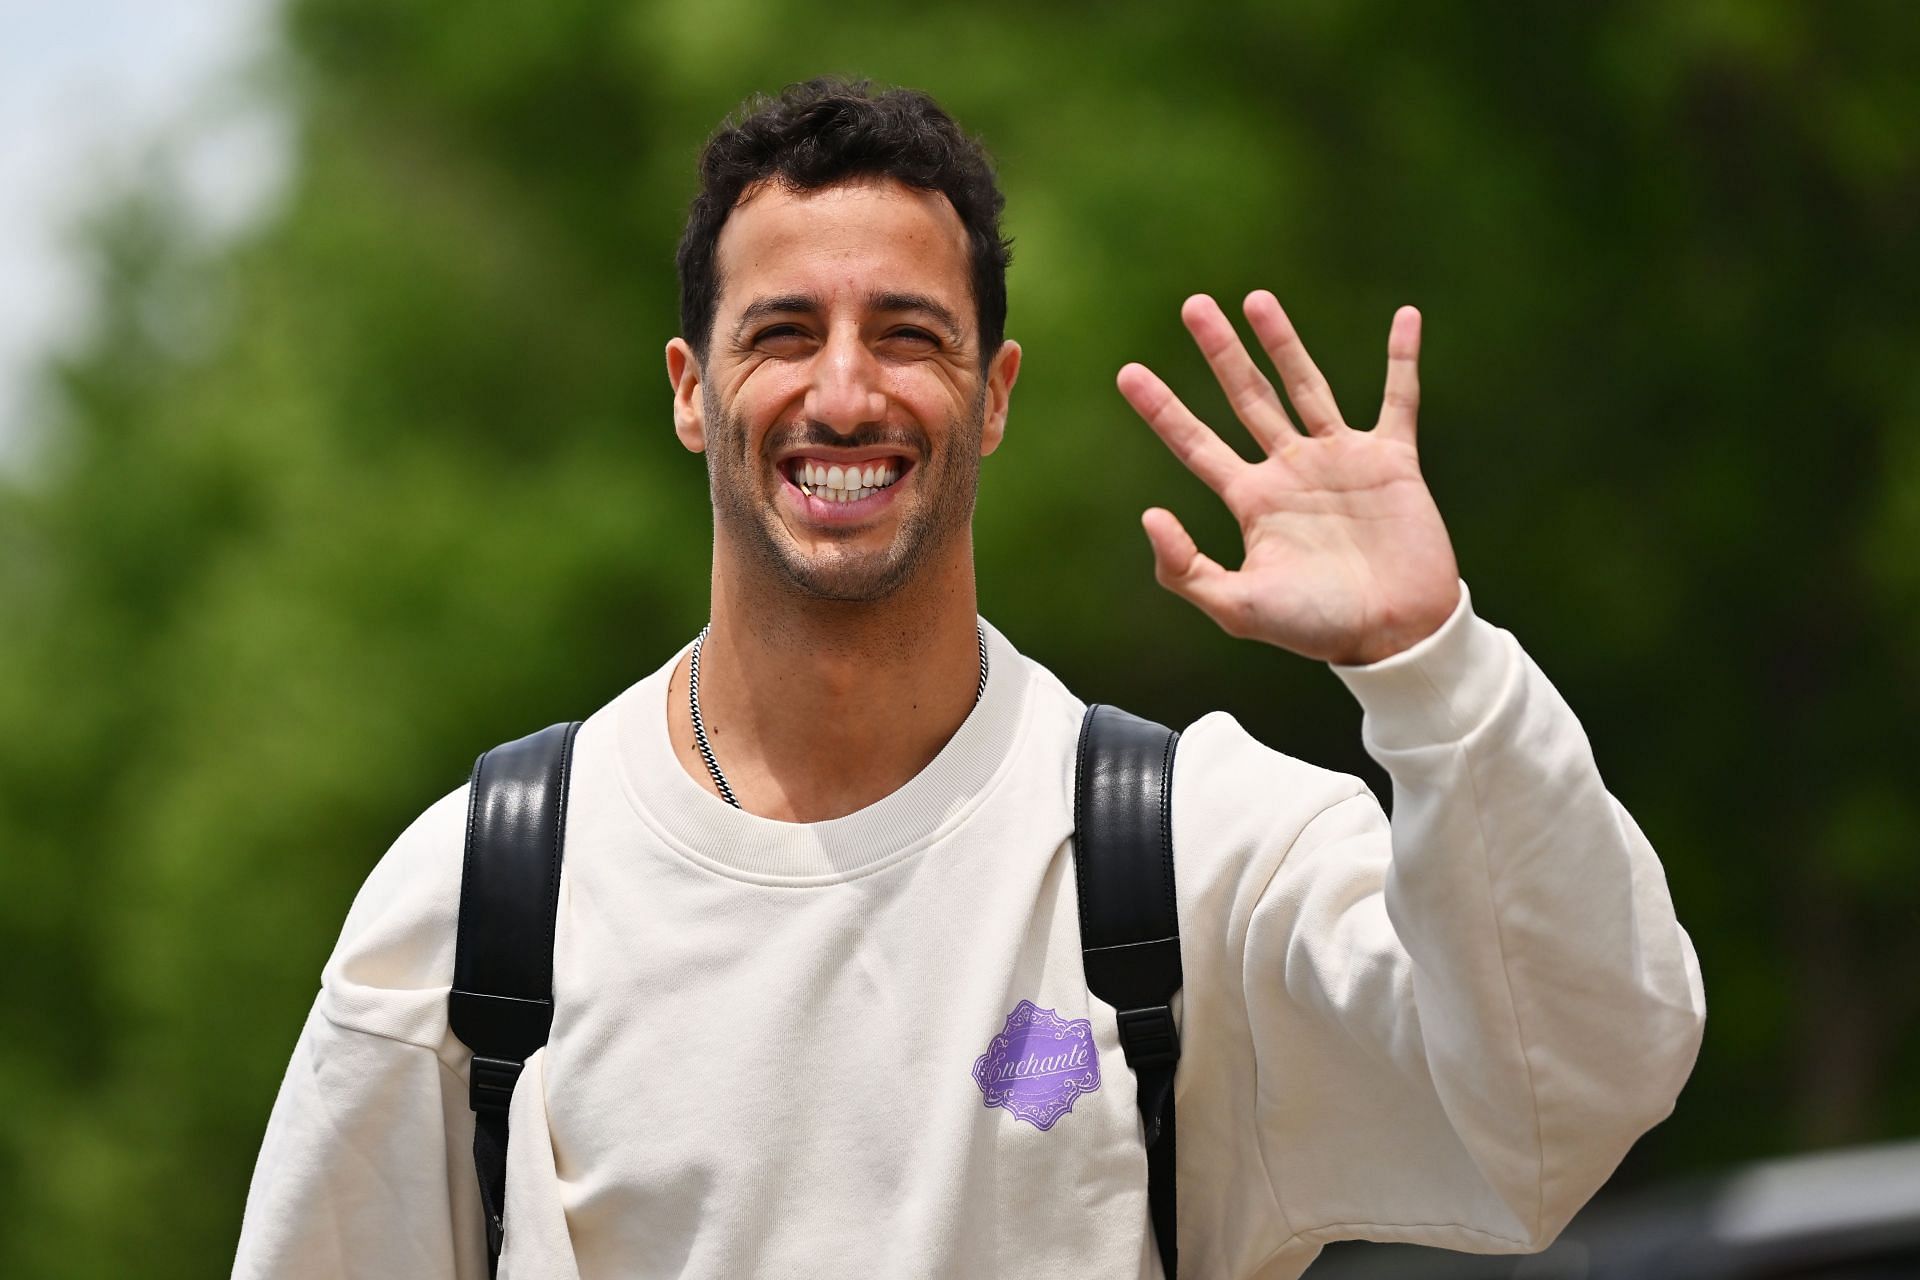 “Yeah, I’m back”: Daniel Ricciardo is raring to go after his F1 ...